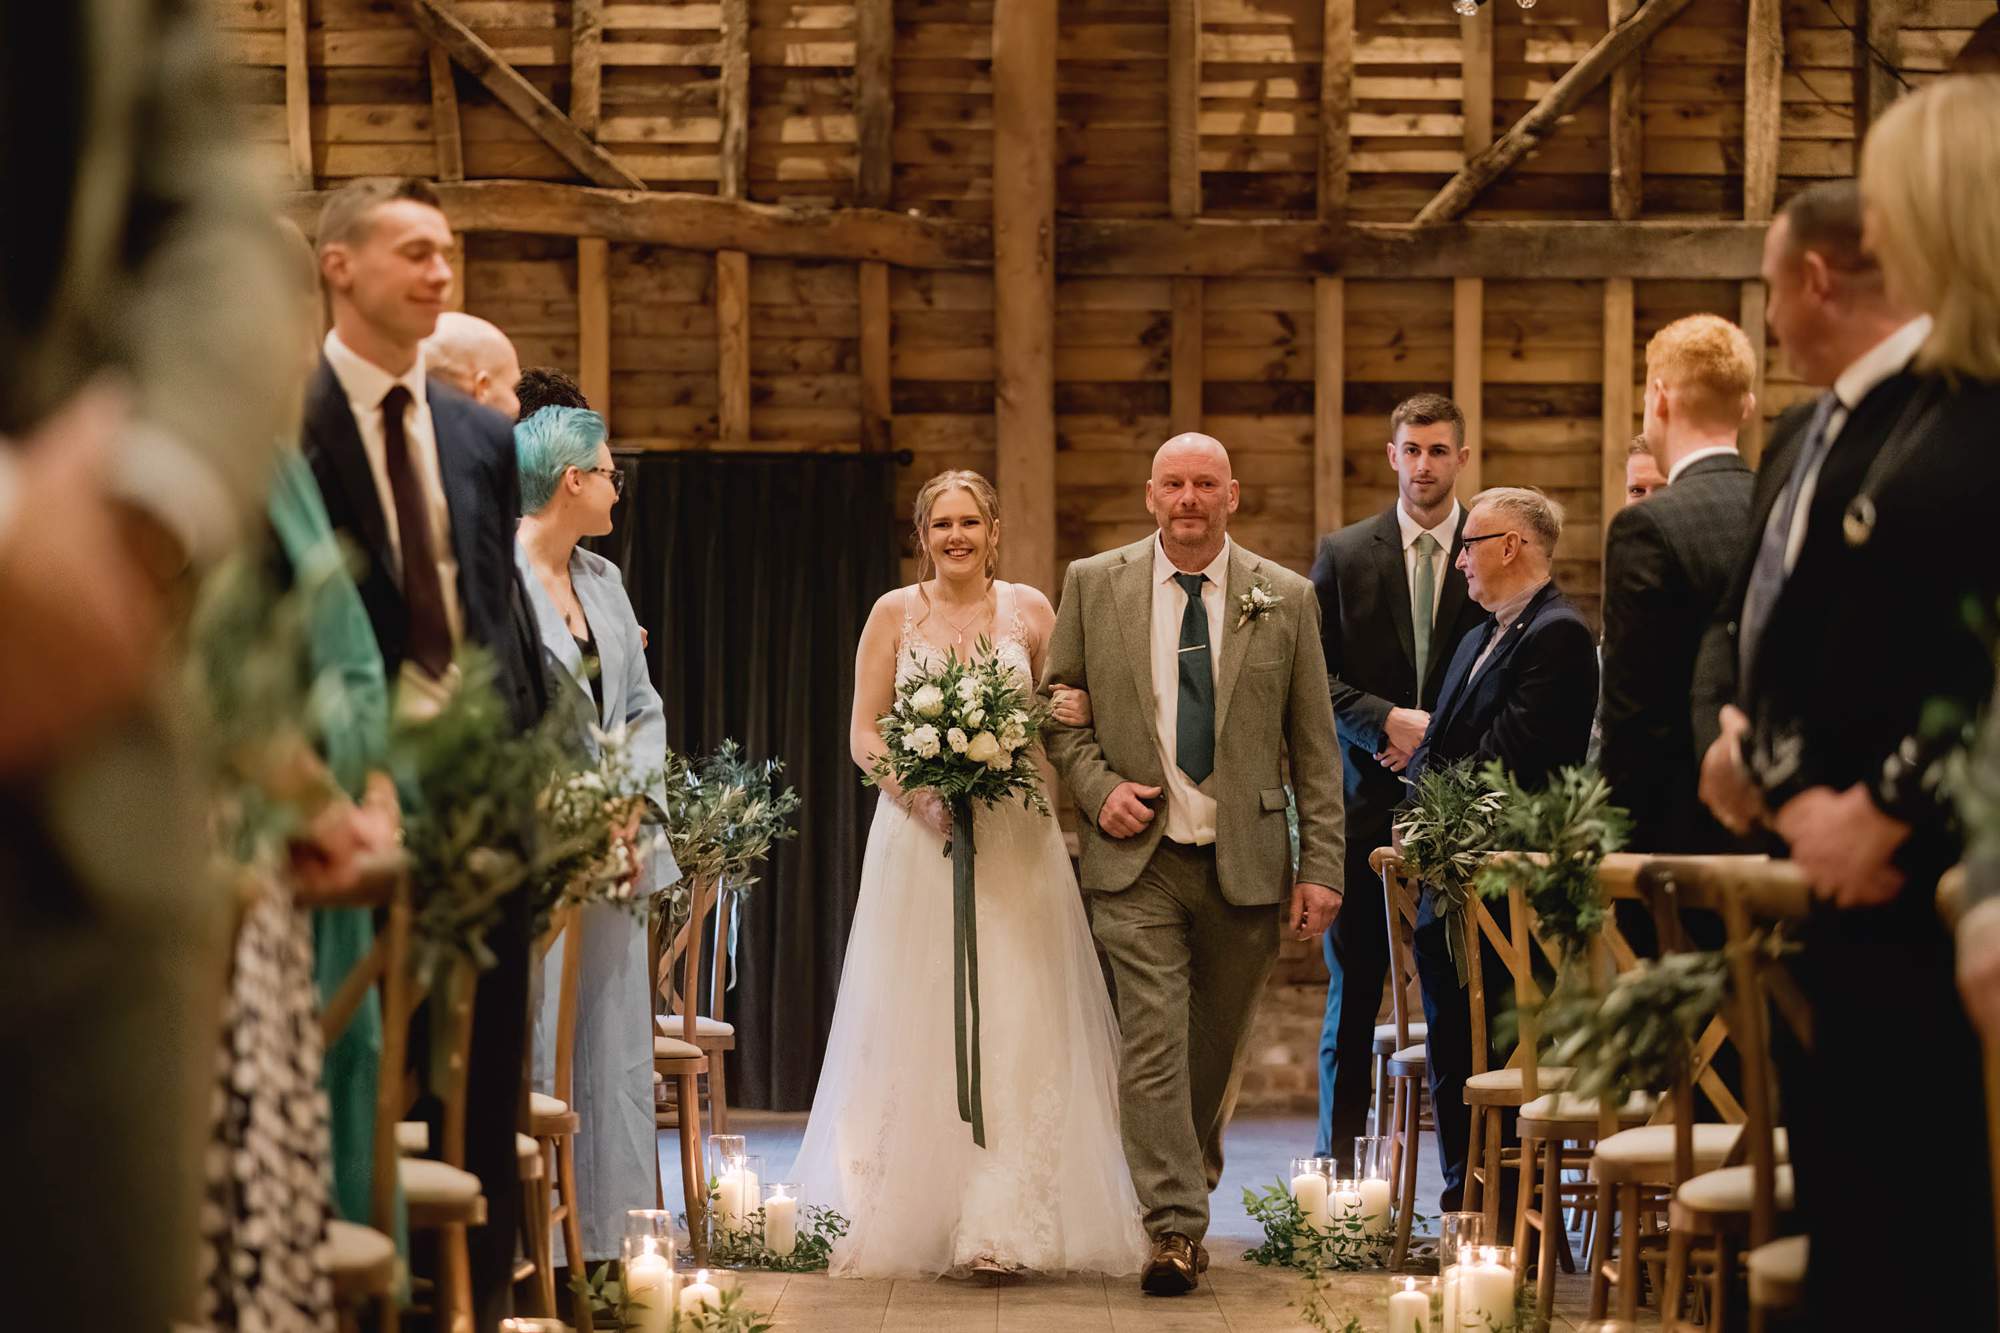 Bride walking down the aisle in the barn with her father.